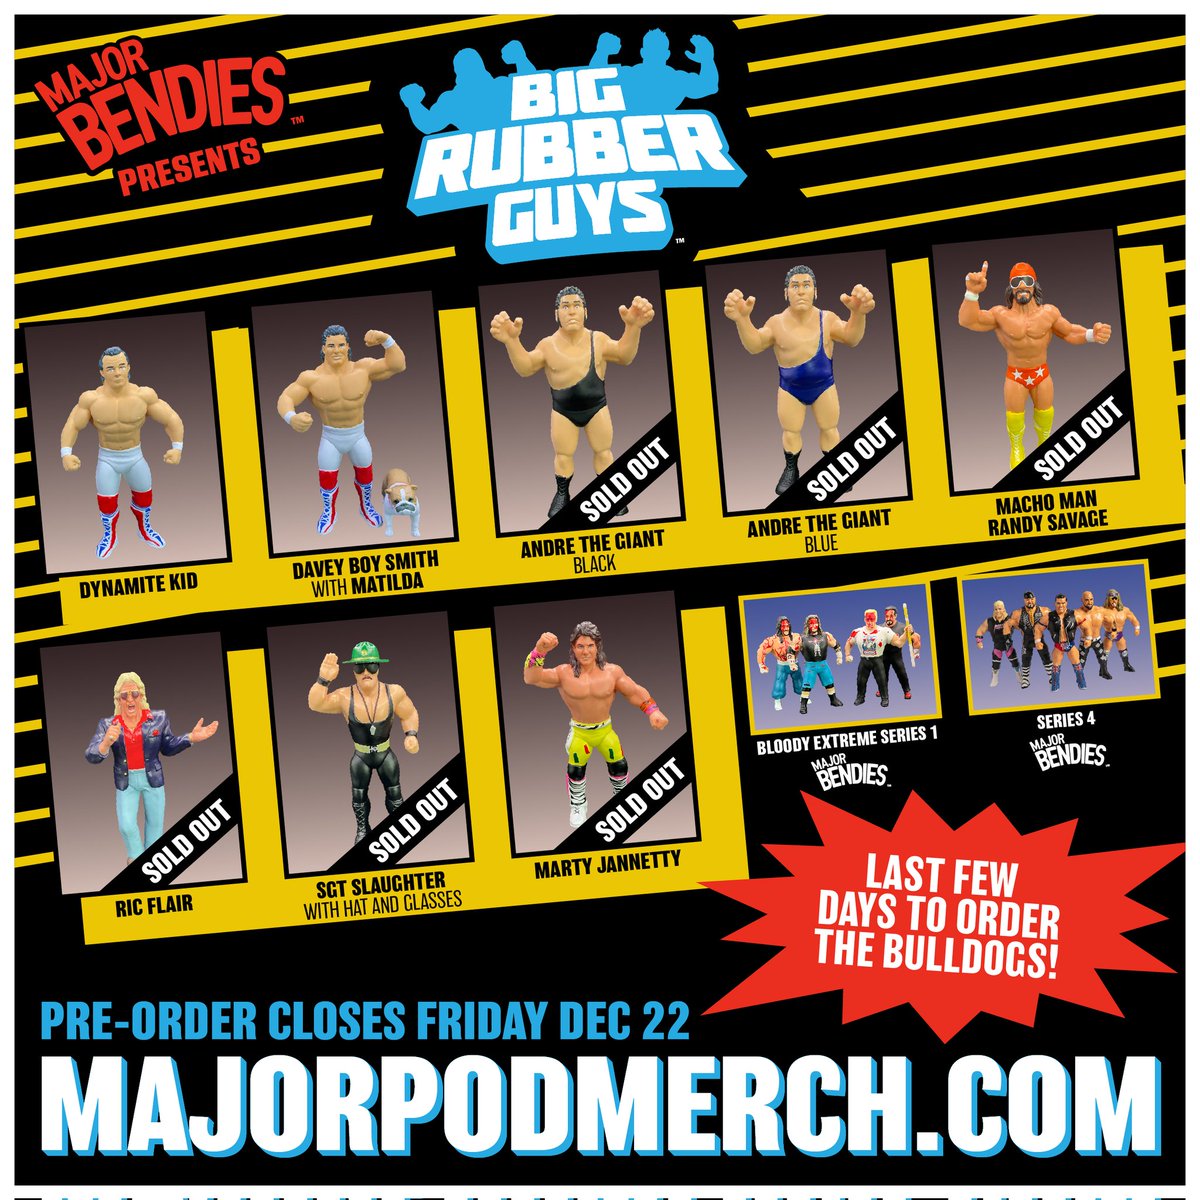 Retro ad design! Featuring Big Rubber Guys series 5! The Bulldogs will be available for pre-order until Friday at Majorpodmerch.com! It's not too late to get in on this line... Phenomenal line-up in 2024 too! #toydesign #graphicdesign #bigrubberguys #ttdwrestling